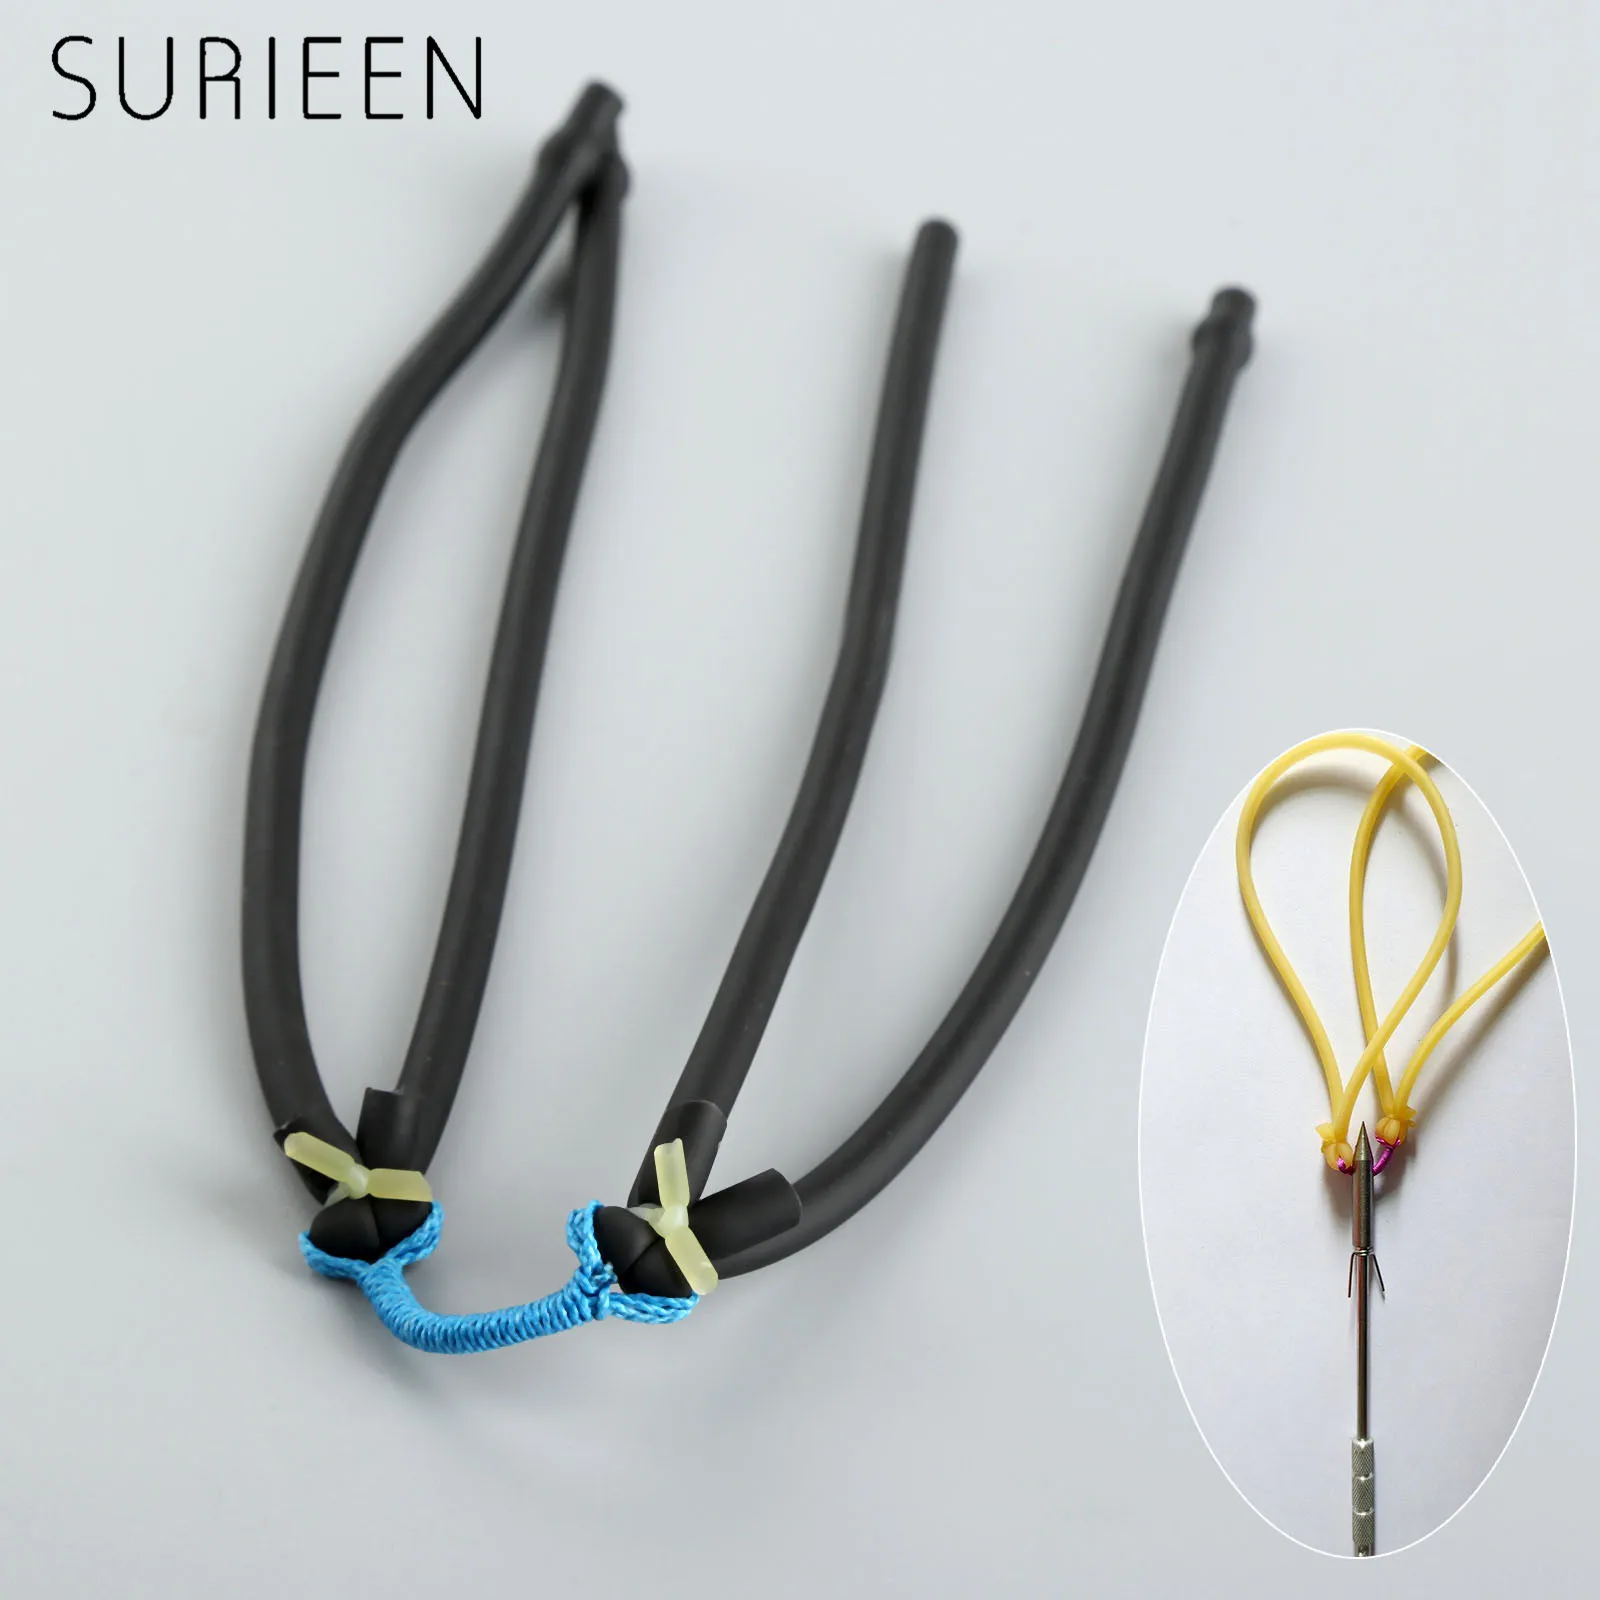 1 Piece Sling Shots Rubber Band Fit For Catching Fishing High Quality  Slingshot Rubber Band Slingshot Replacement 1745 1.7X4.5mm - AliExpress